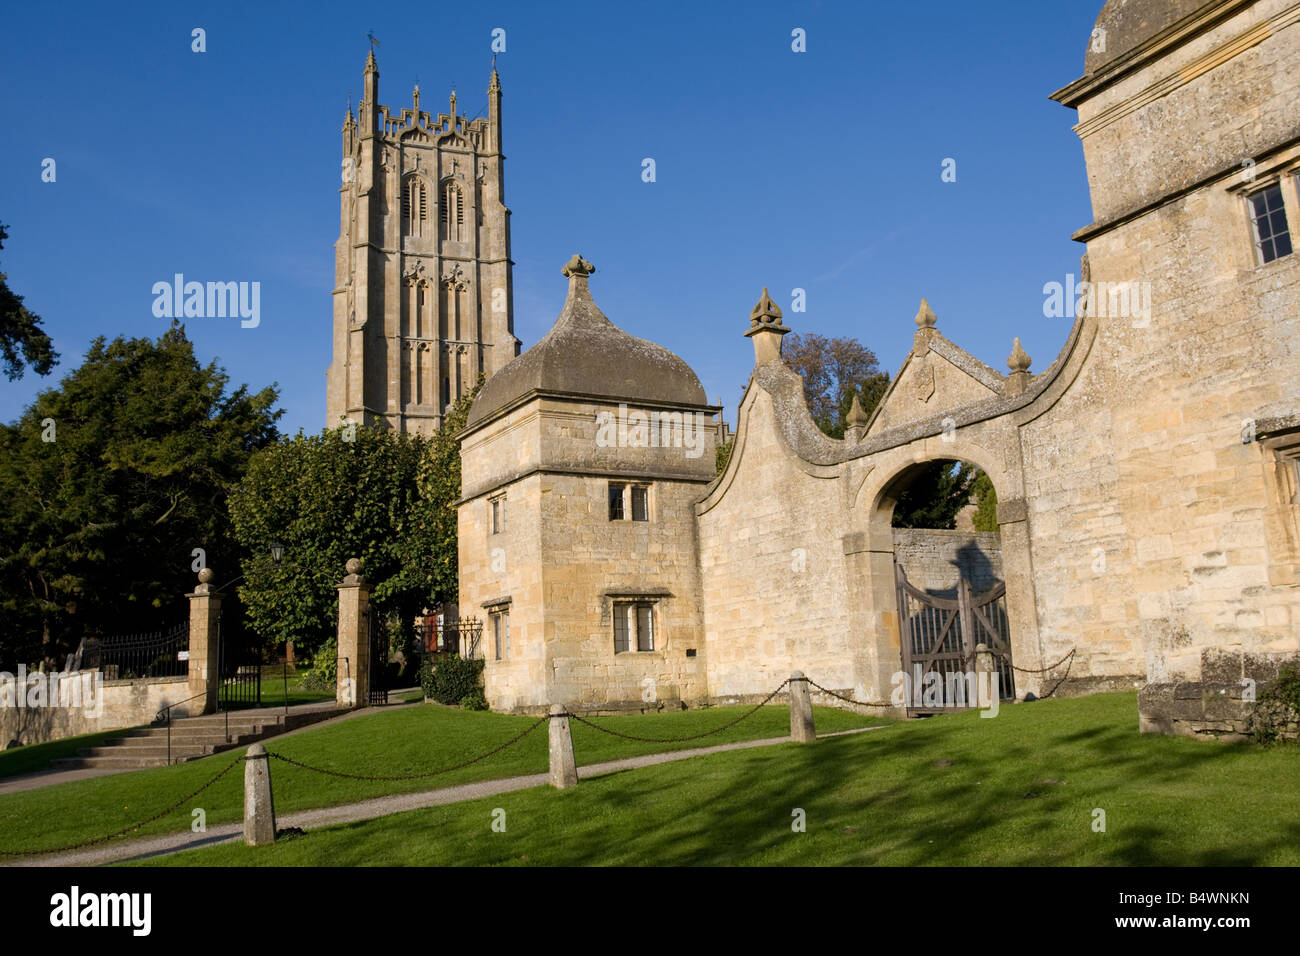 St James Church Chipping Campden Cotswolds UK Stock Photo